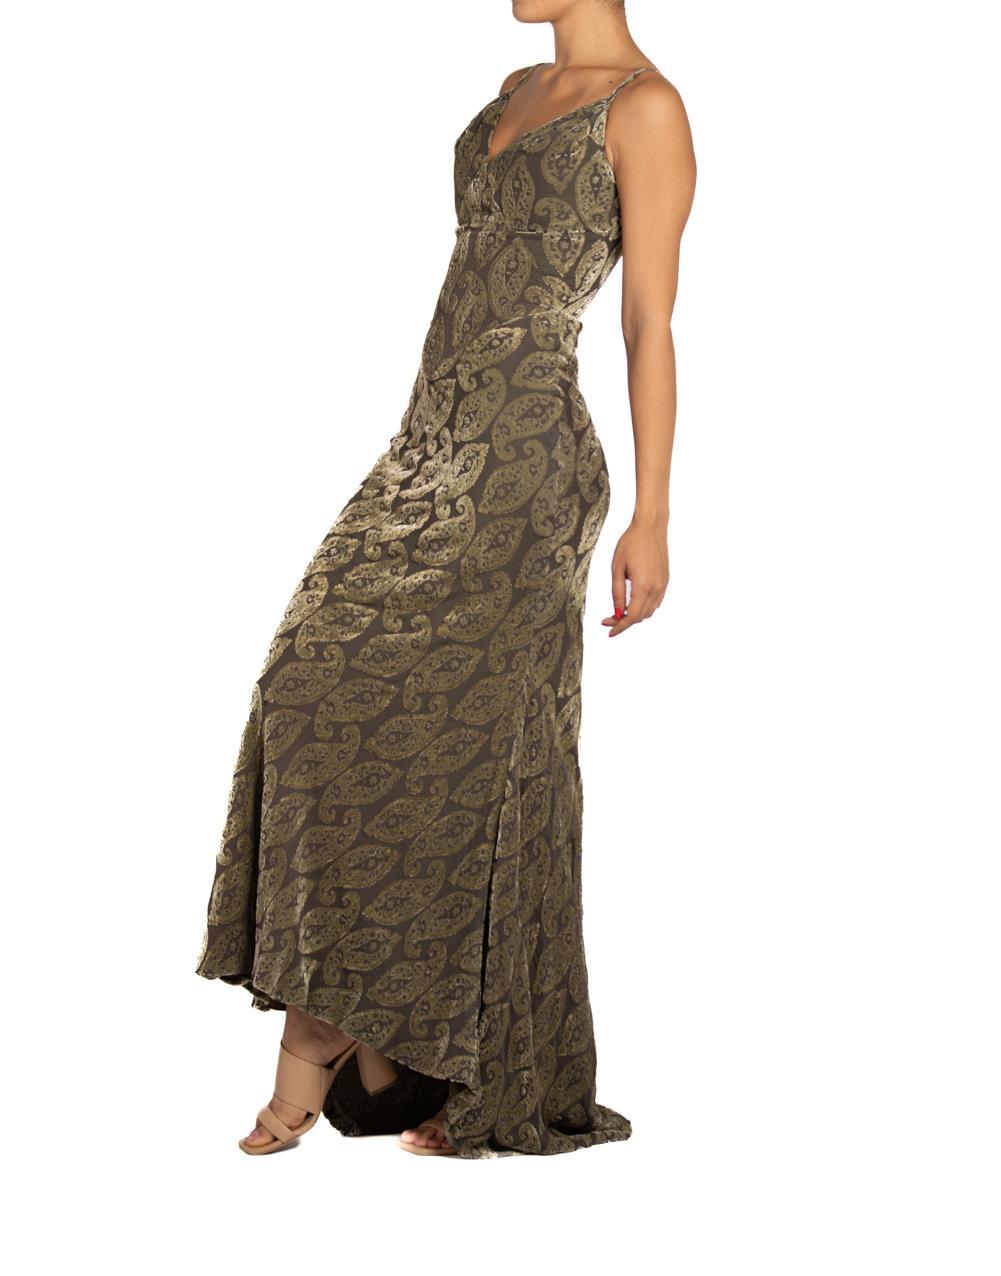 1990S DONALD DEAL Olive Green Bias Cut Rayon & Silk Burnout Velvet Dress In Excellent Condition For Sale In New York, NY